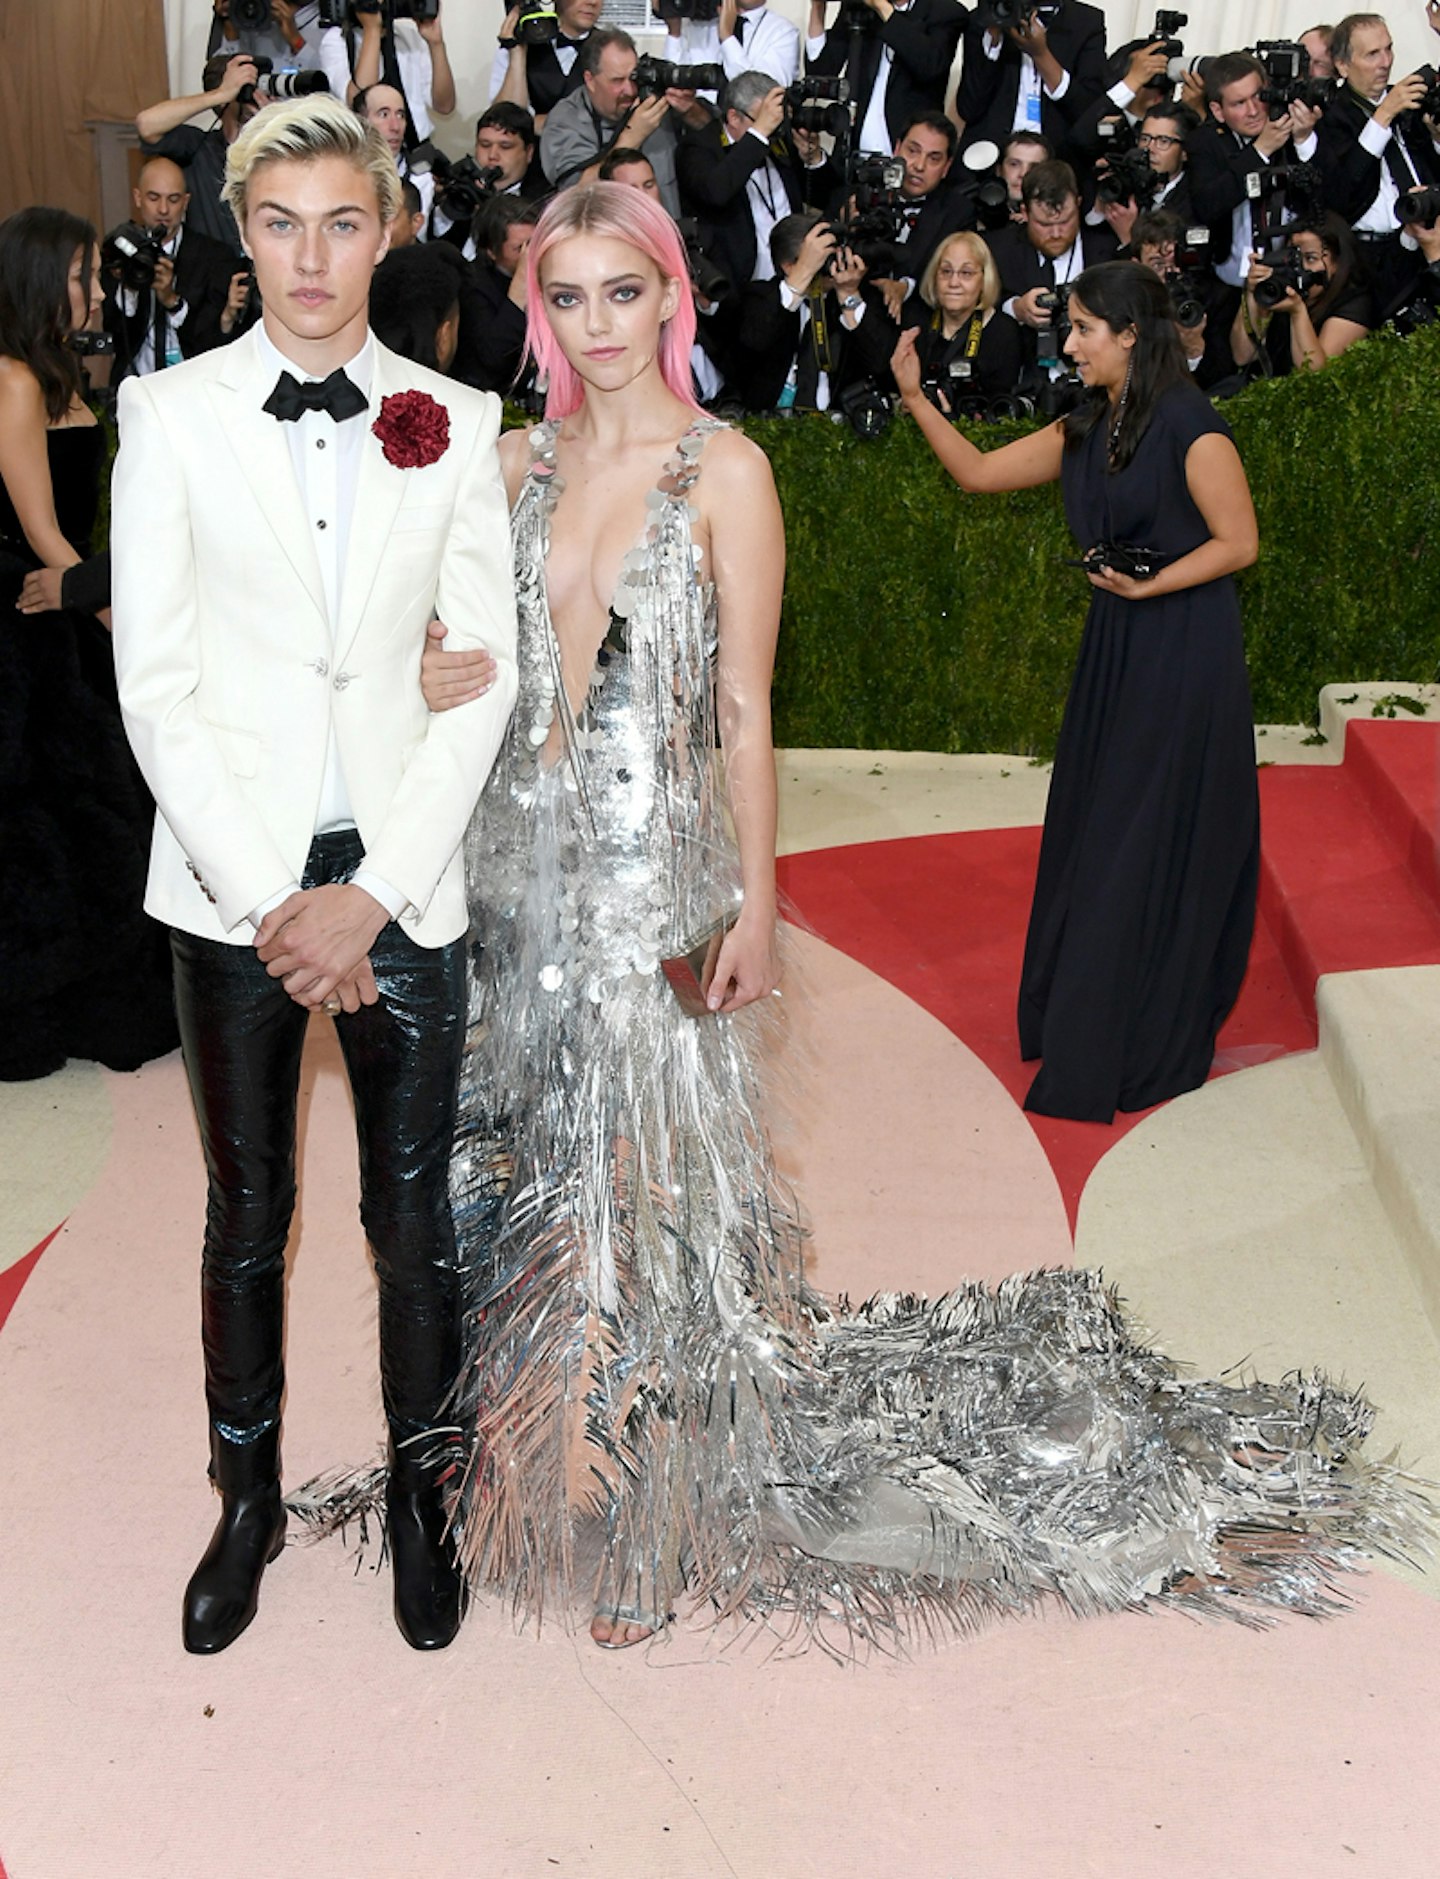 met gala fashion style red carpet celebrity dress gown technology best dressed worst